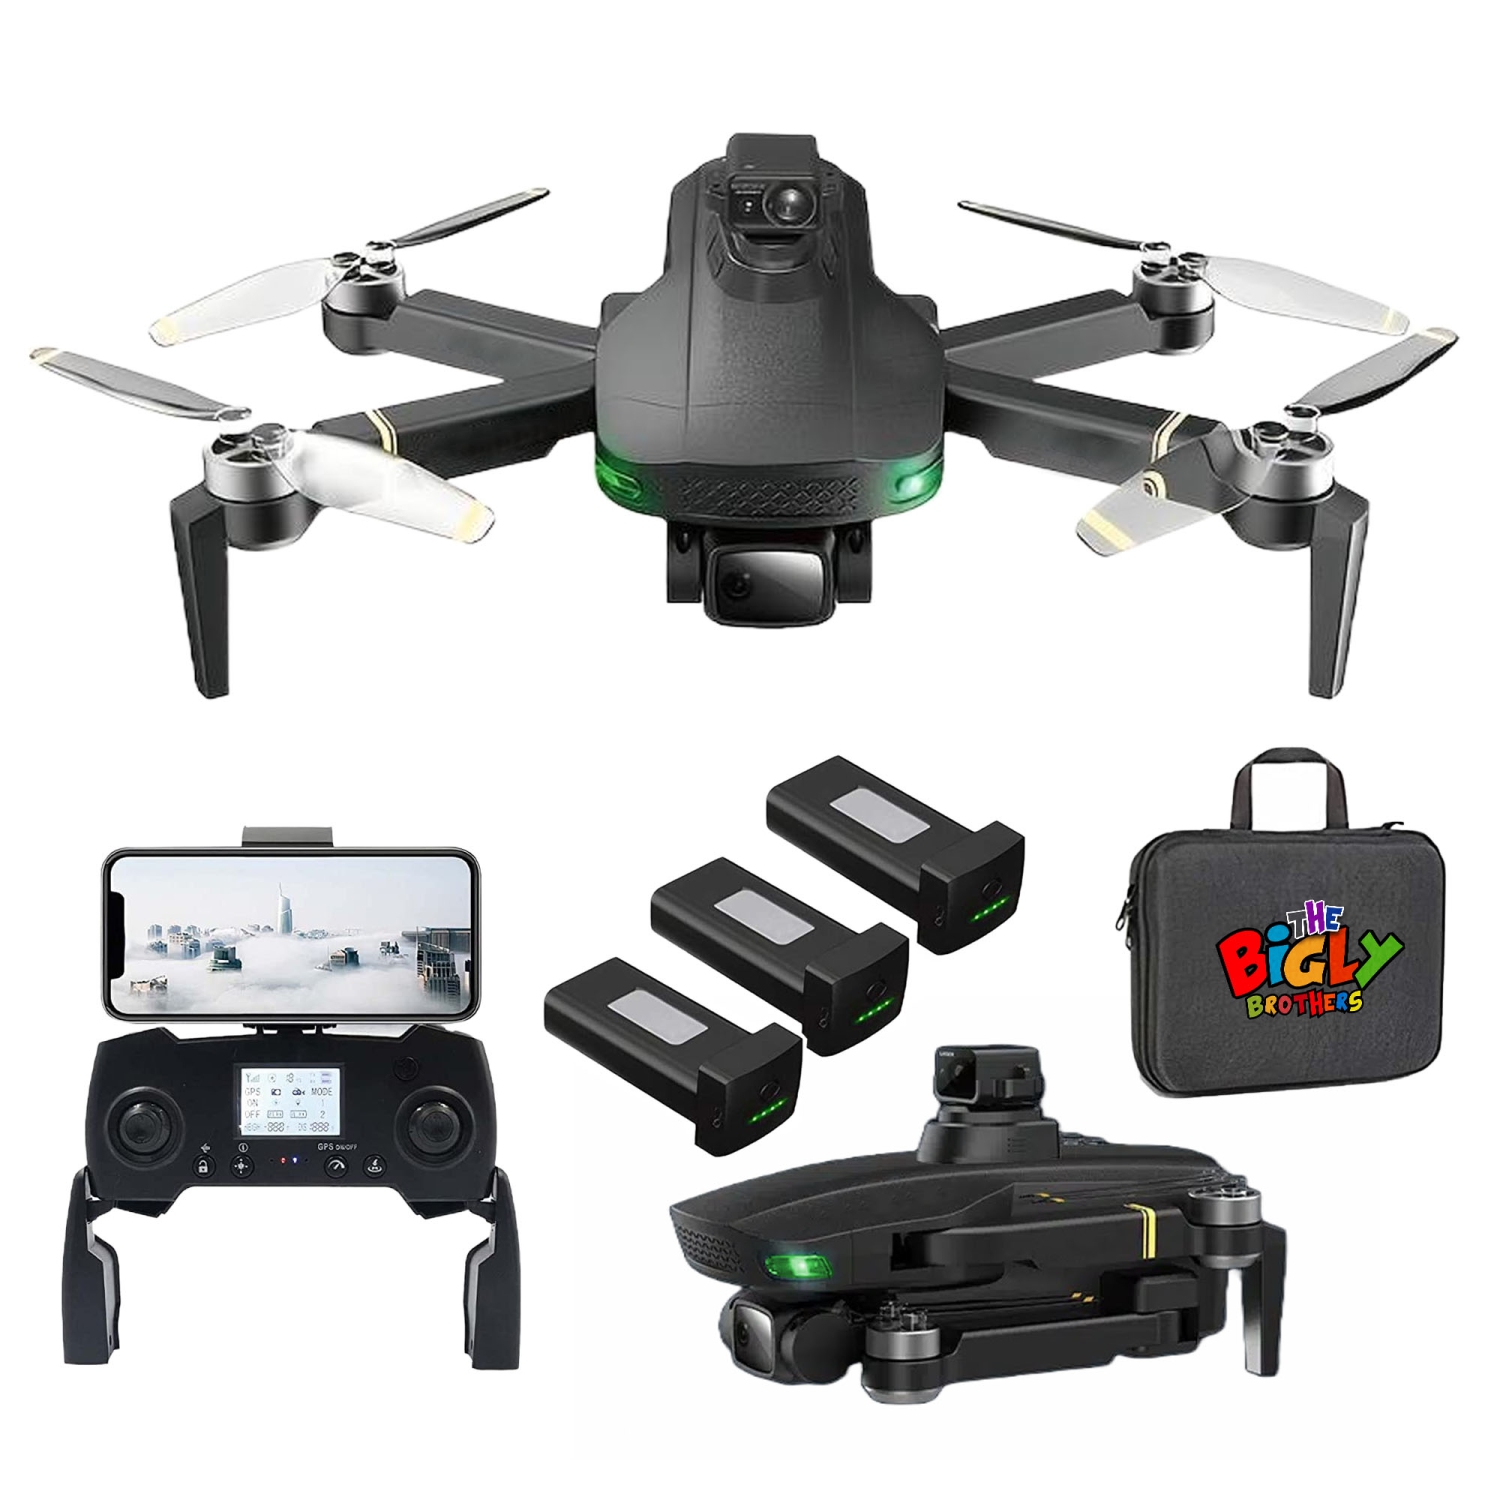 The Bigly Brothers GD93 Midnight Specter GPS Drone, 720 Degrees Obstacle Avoidance, Smart Return home, 4K Camera 1000m Range, 90mins Flight Time Below 249g, carrying case included